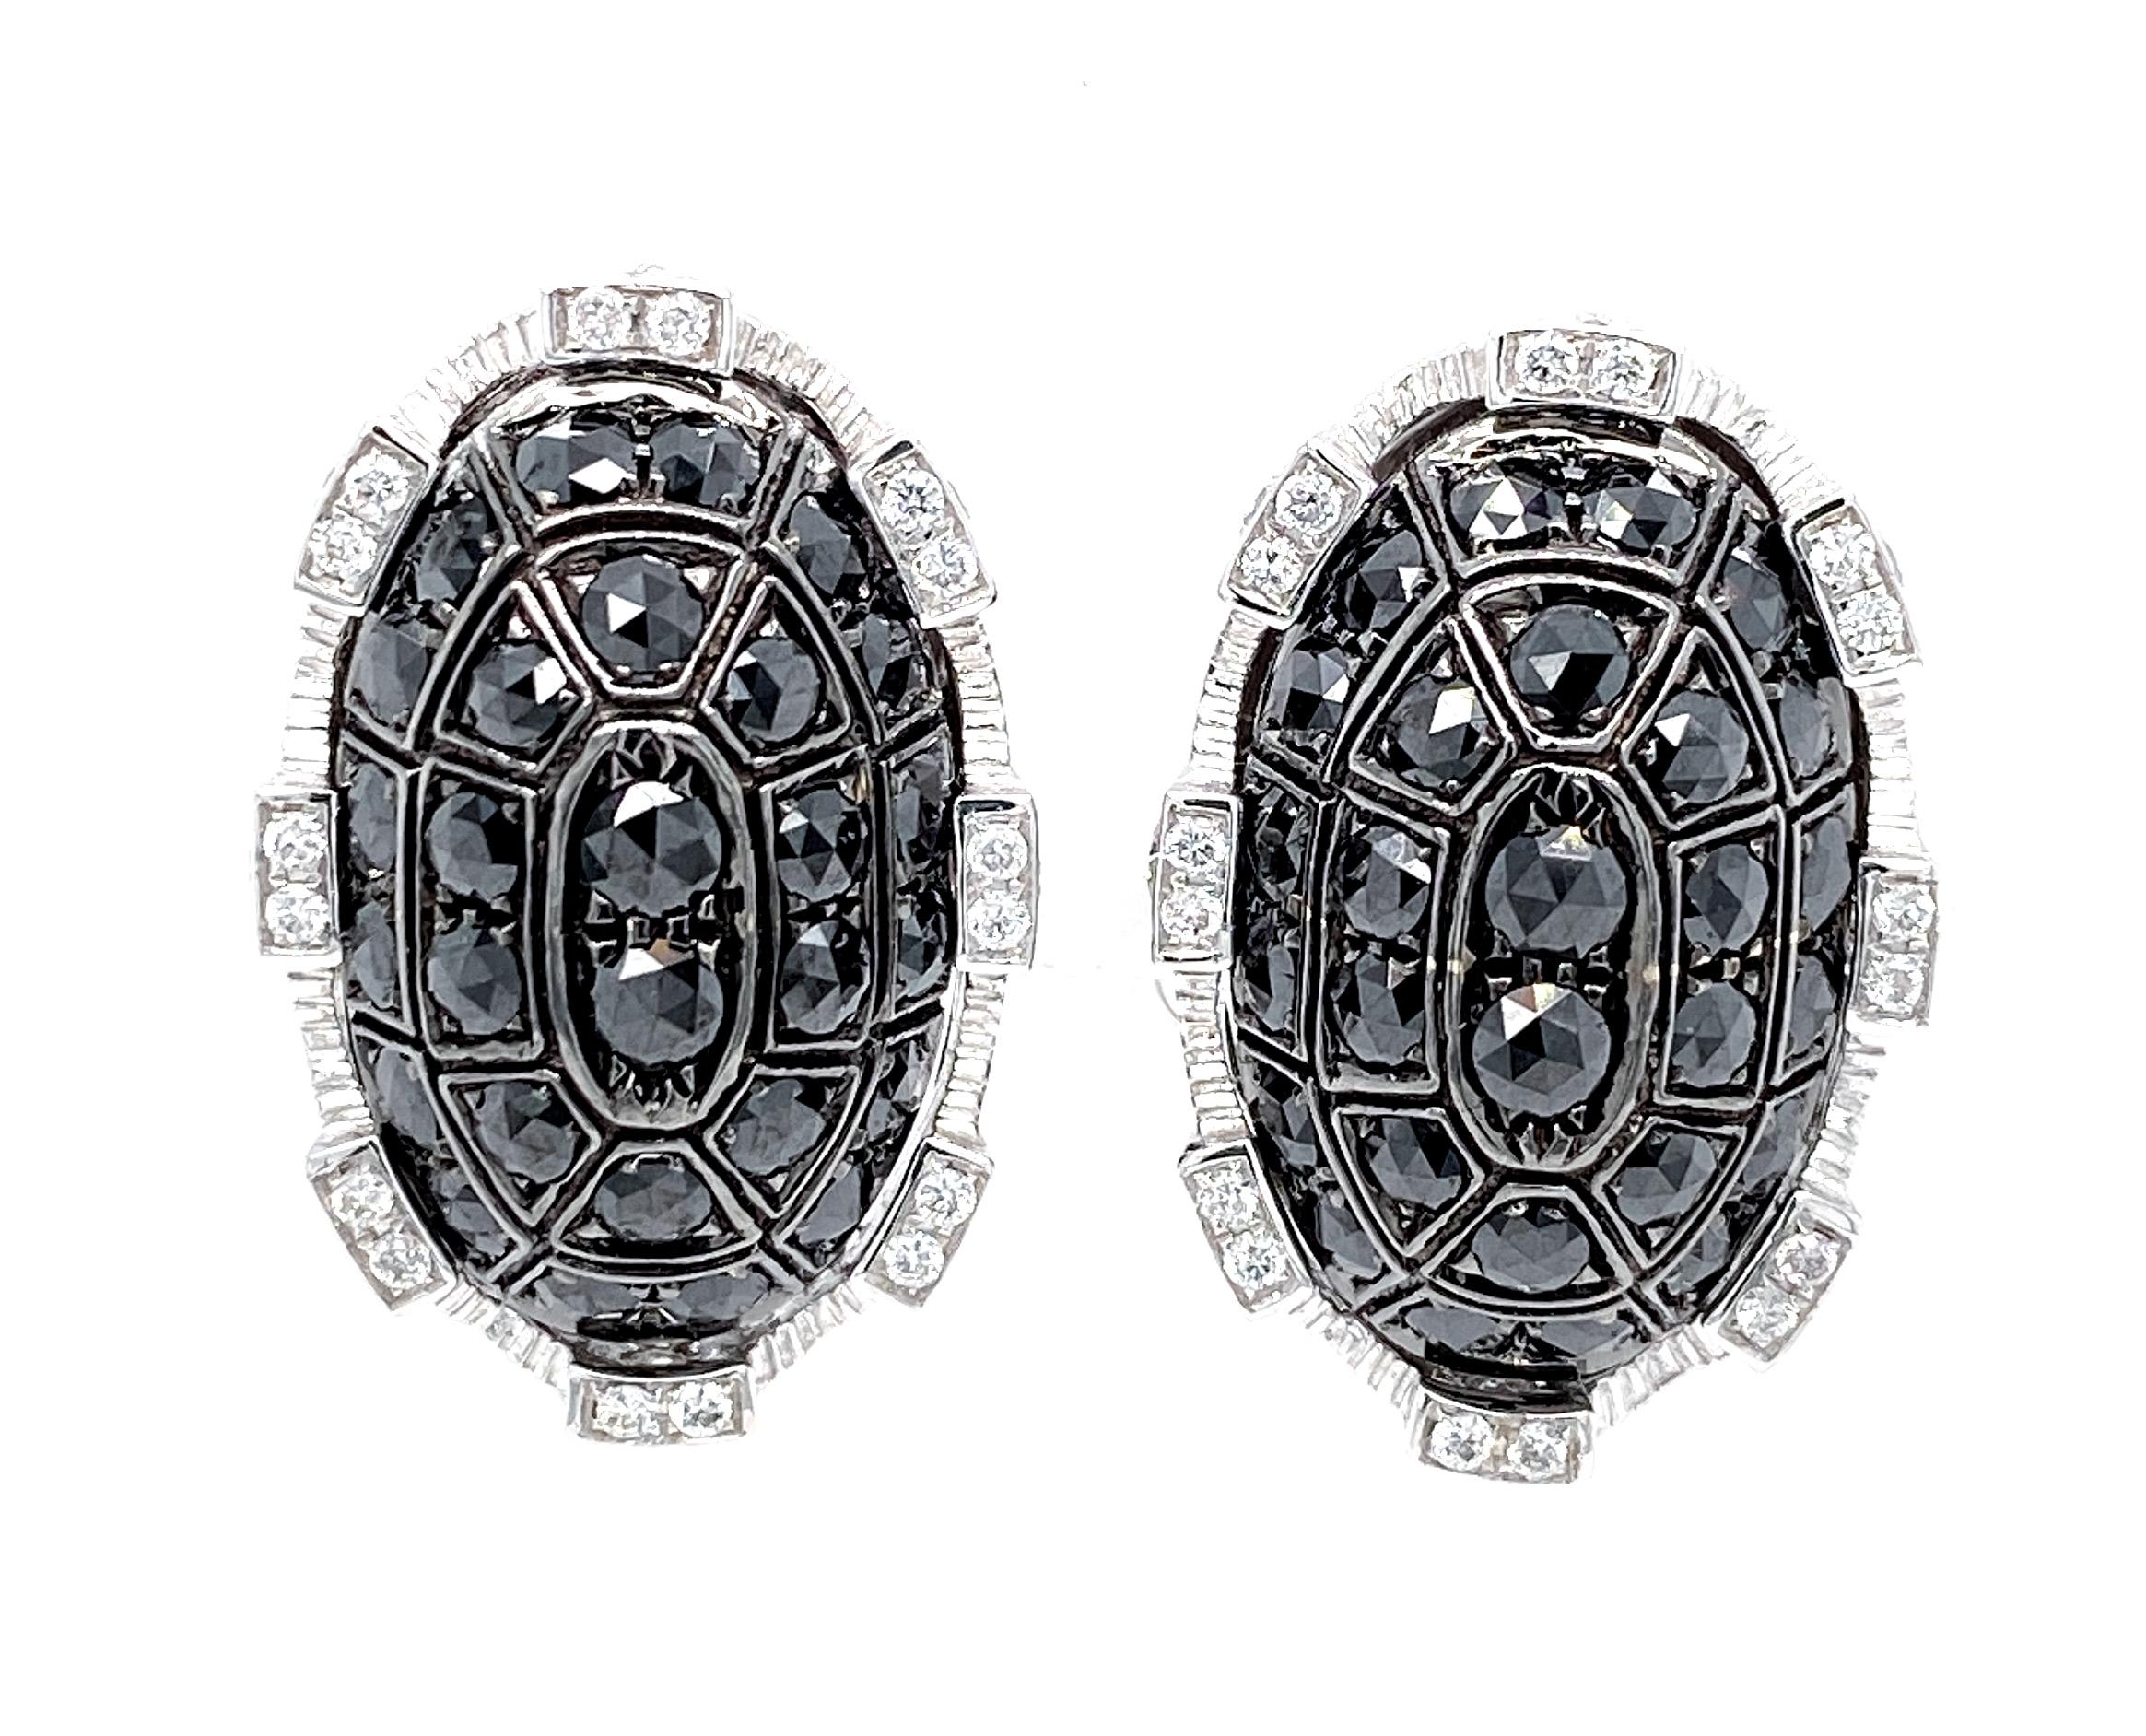 This bold and edgy pair of statement stud earrings by Dilys’ was inspired by castle fort walls and designed to represent strength and integrity. The dome motifs in the middle are set with a total of 56 black diamonds totaling 1.72 carats, while the